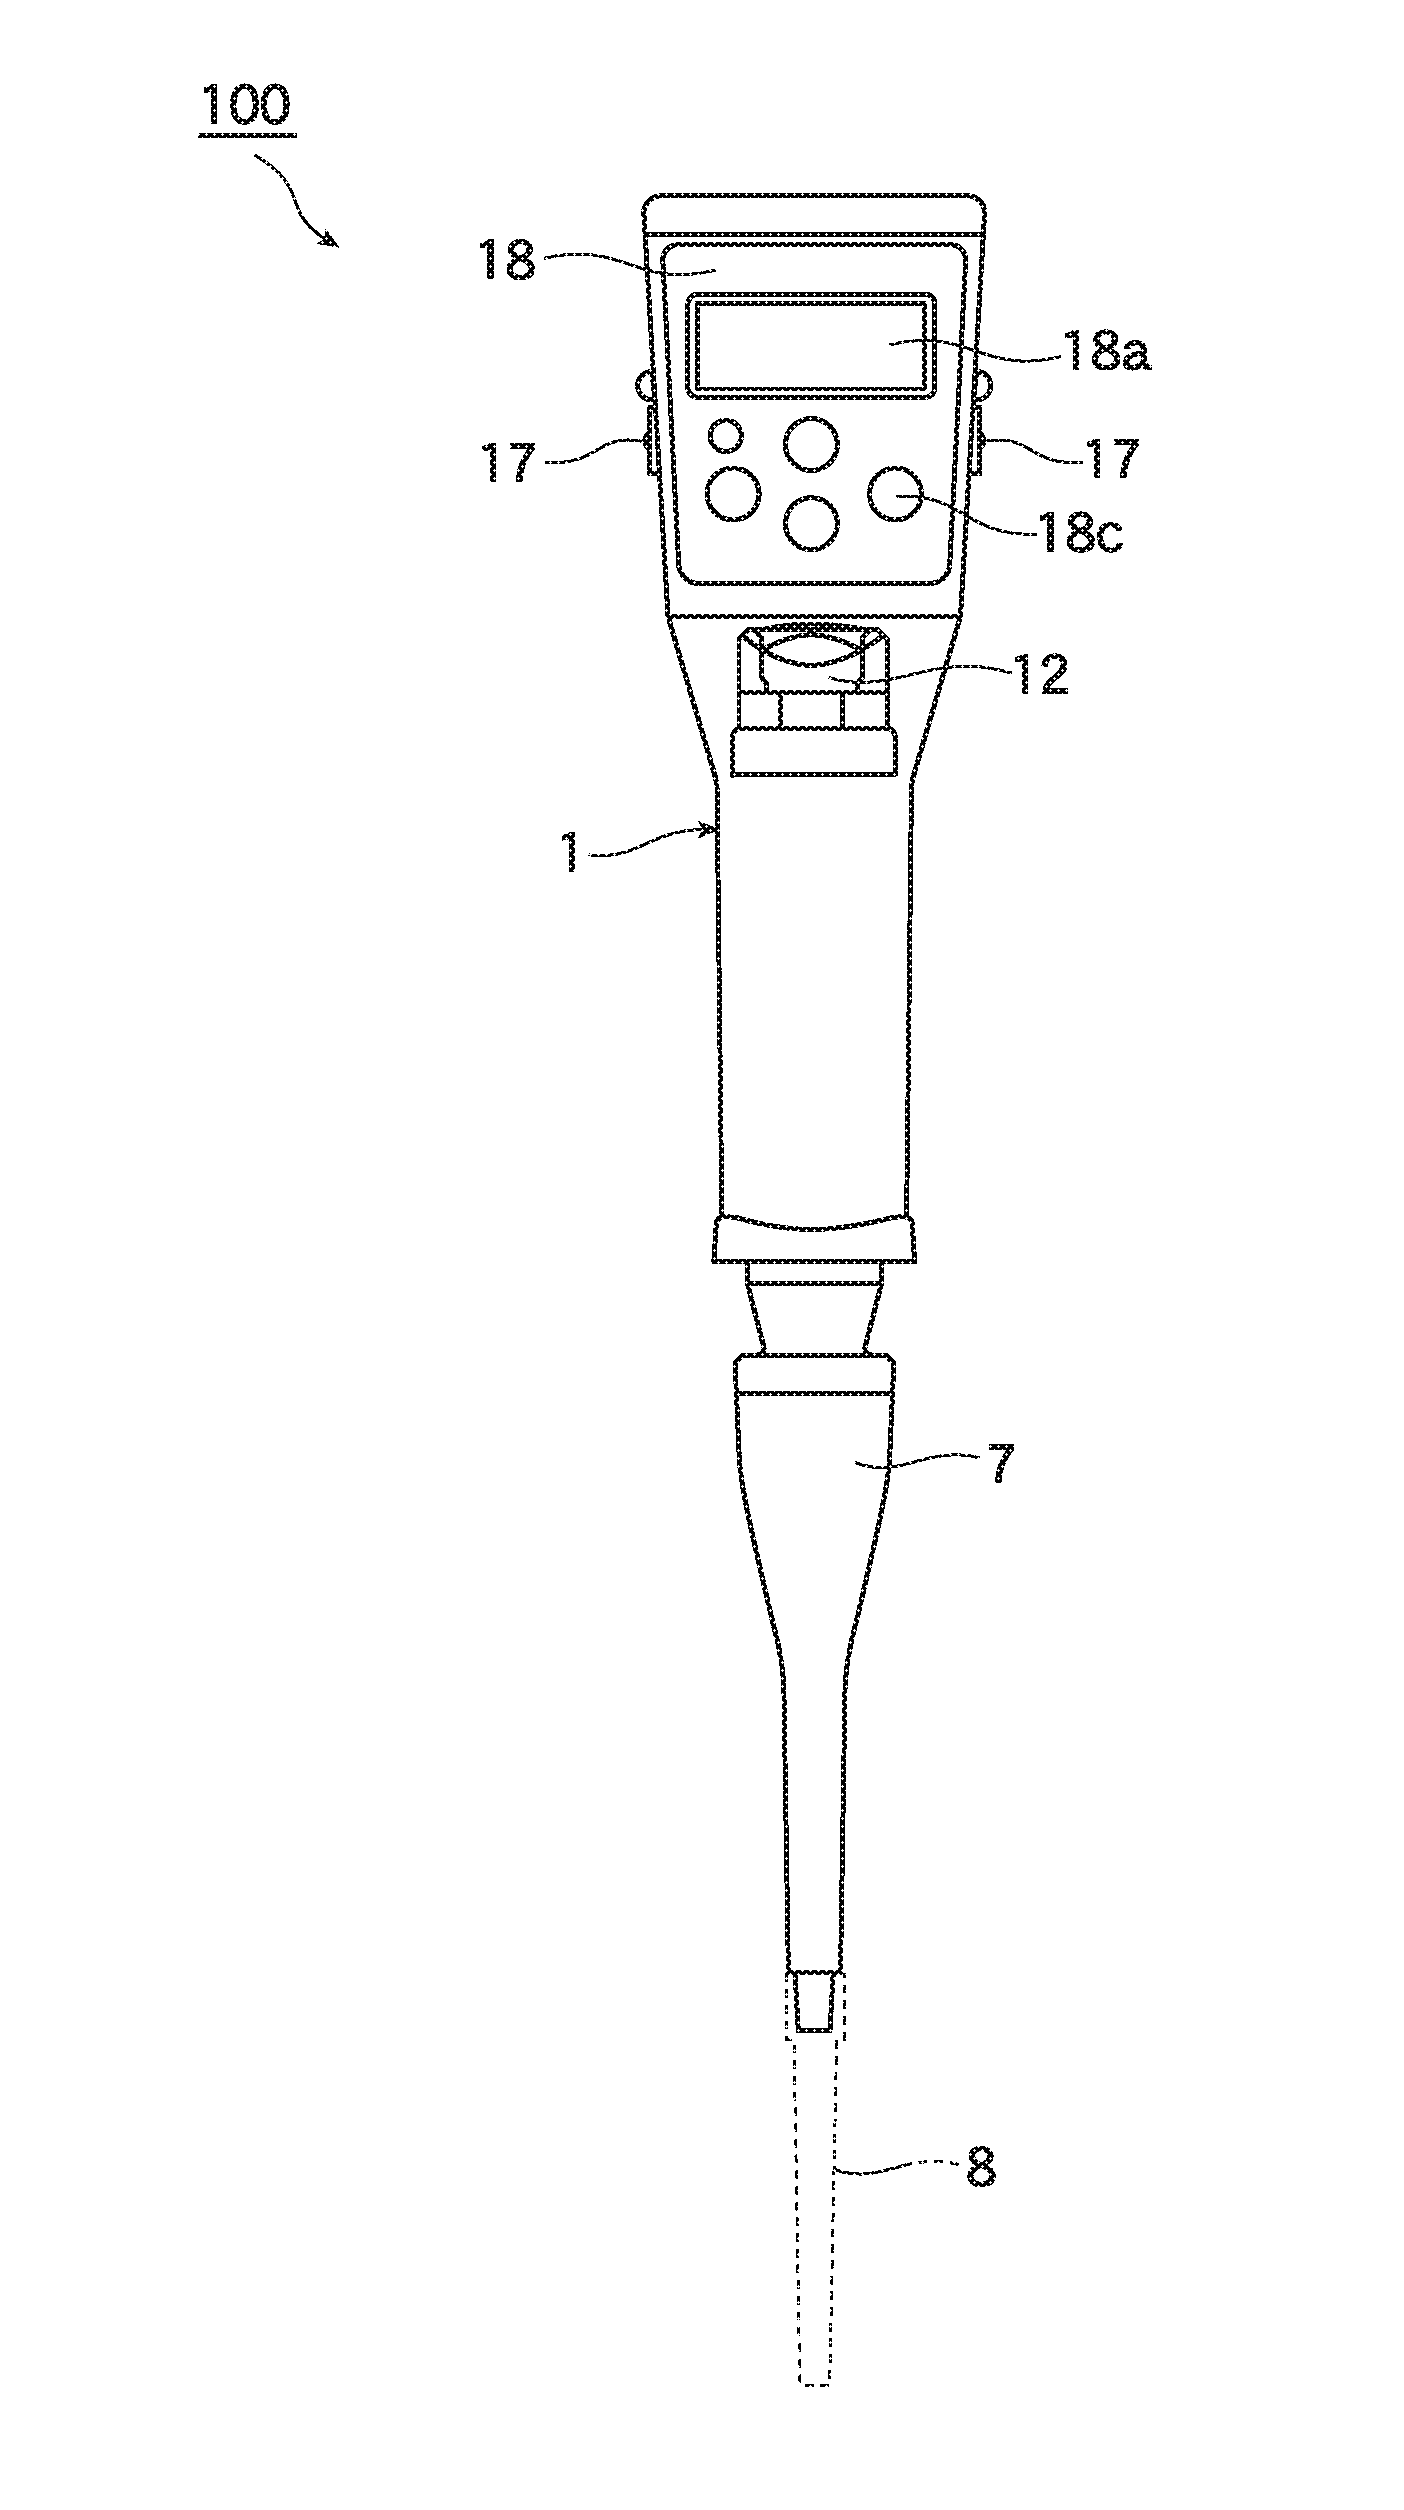 Method for accurately calibrating discharge volume of pipette, and apparatus therefor